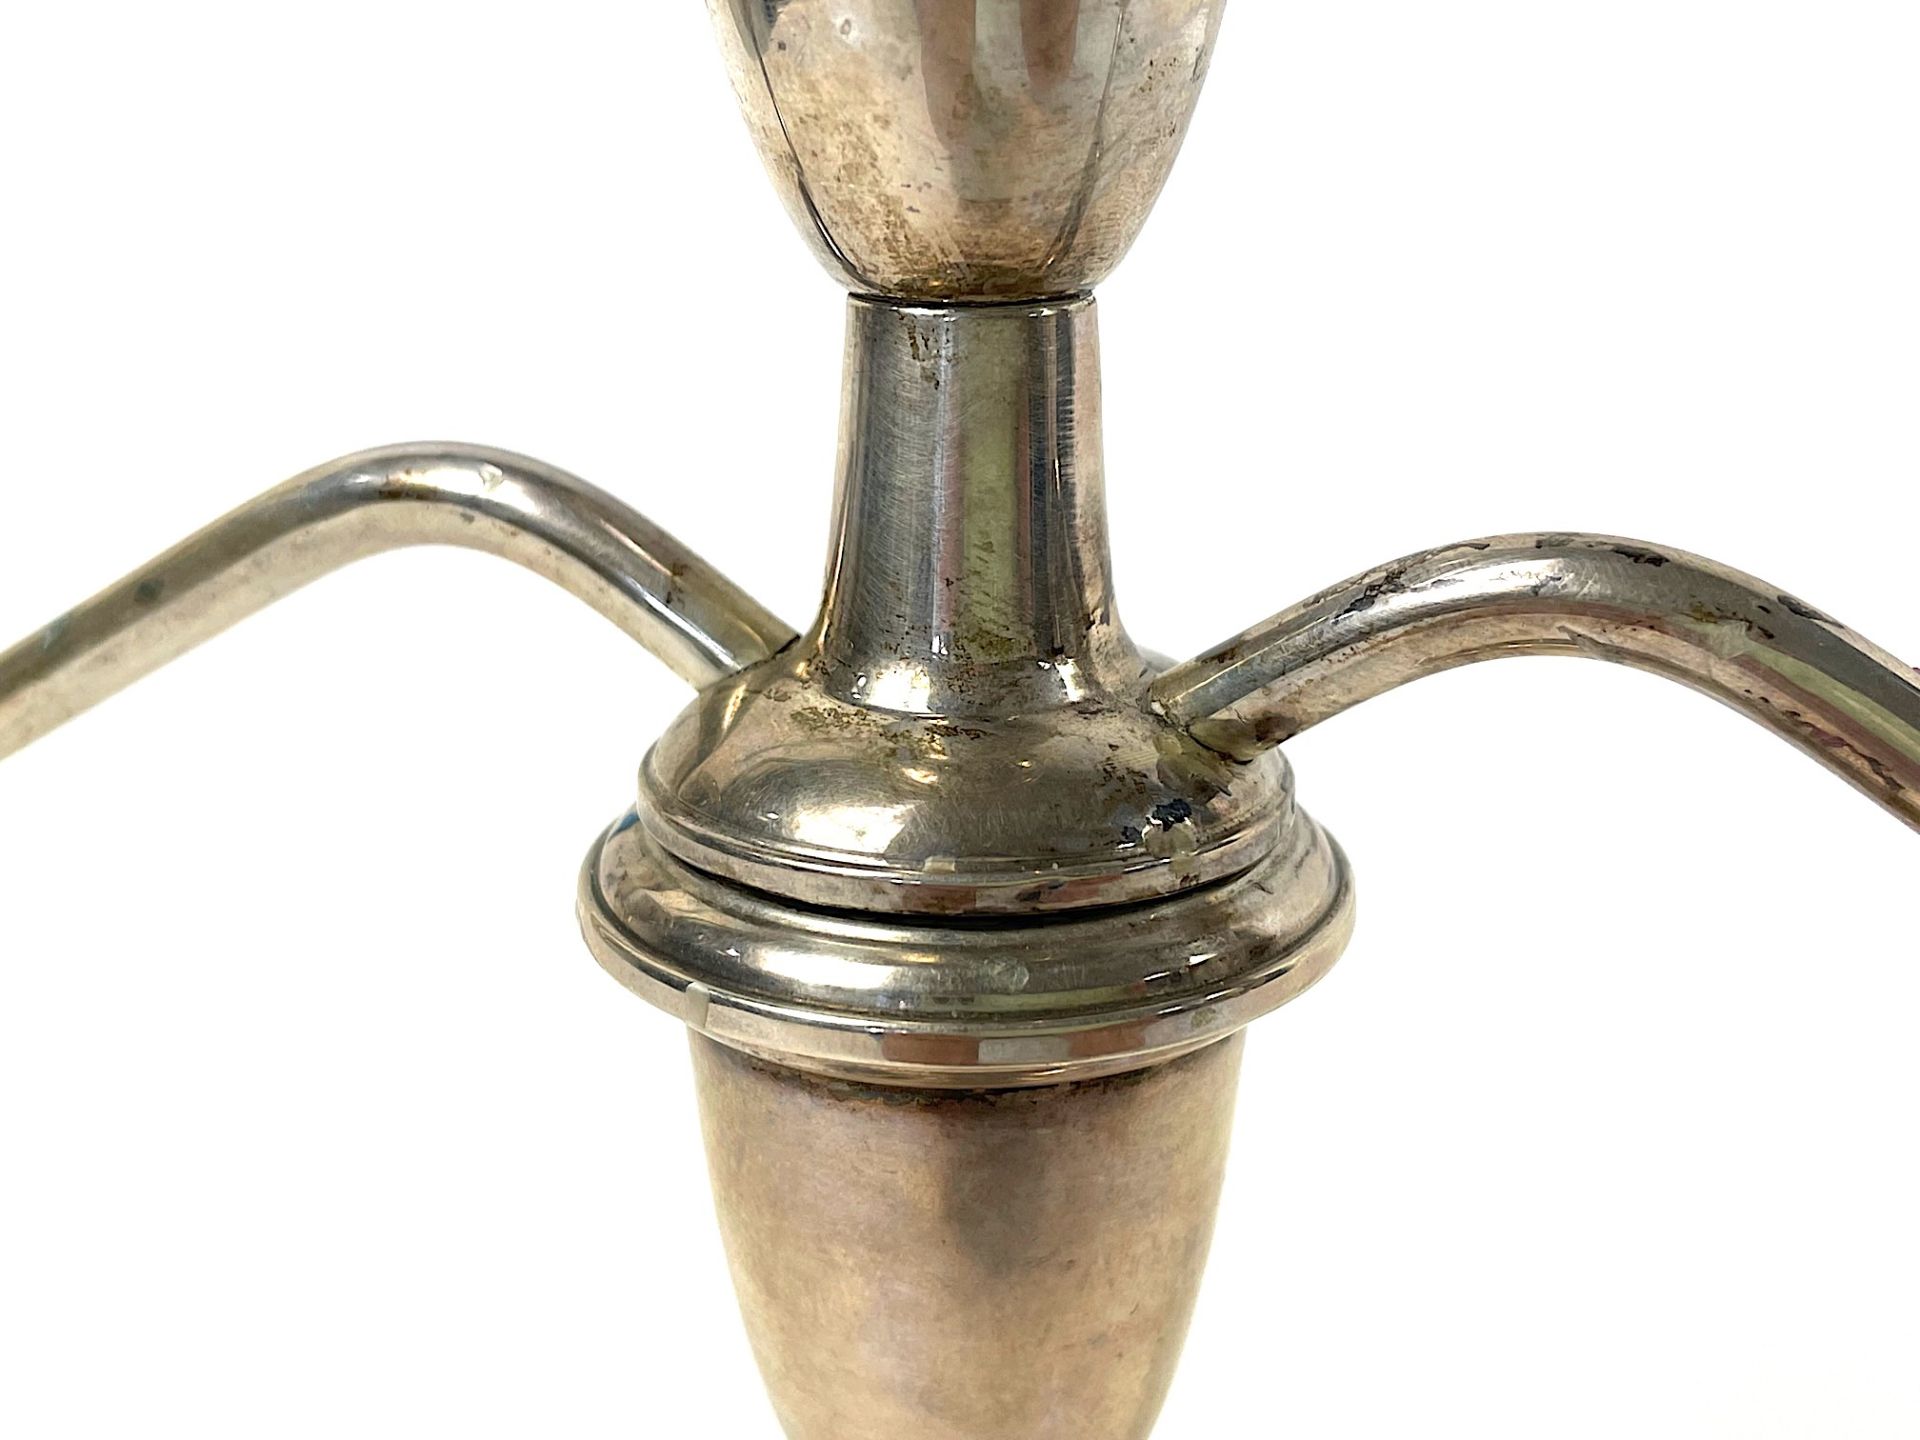 Candlestick in 925 silver - Image 5 of 9